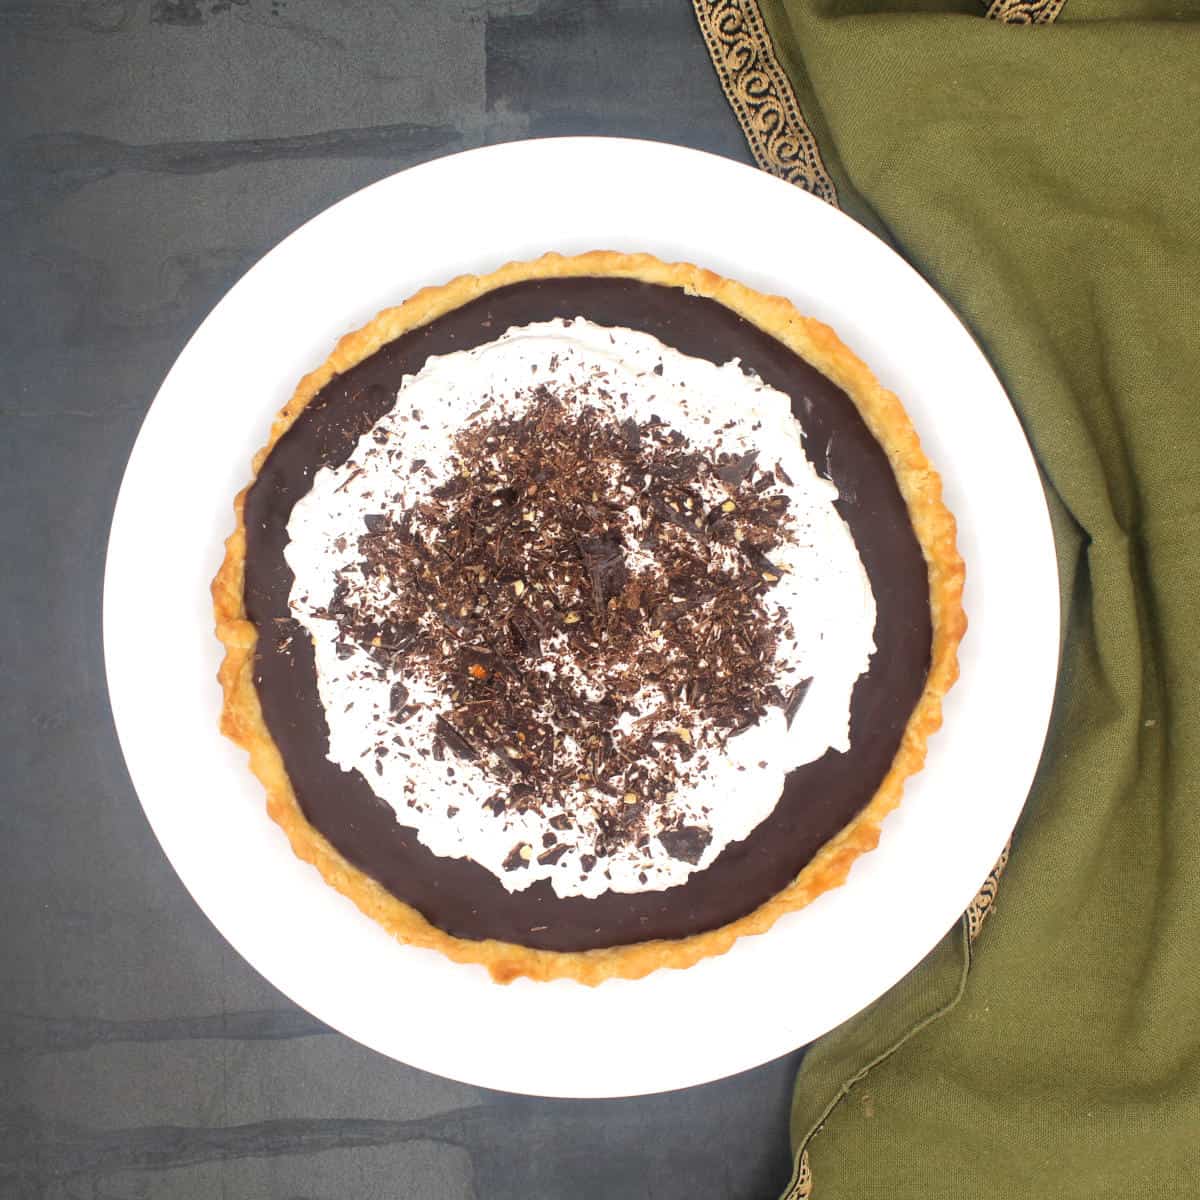 Vegan chocolate pie in plate with whipped cream and chocolate shavings.